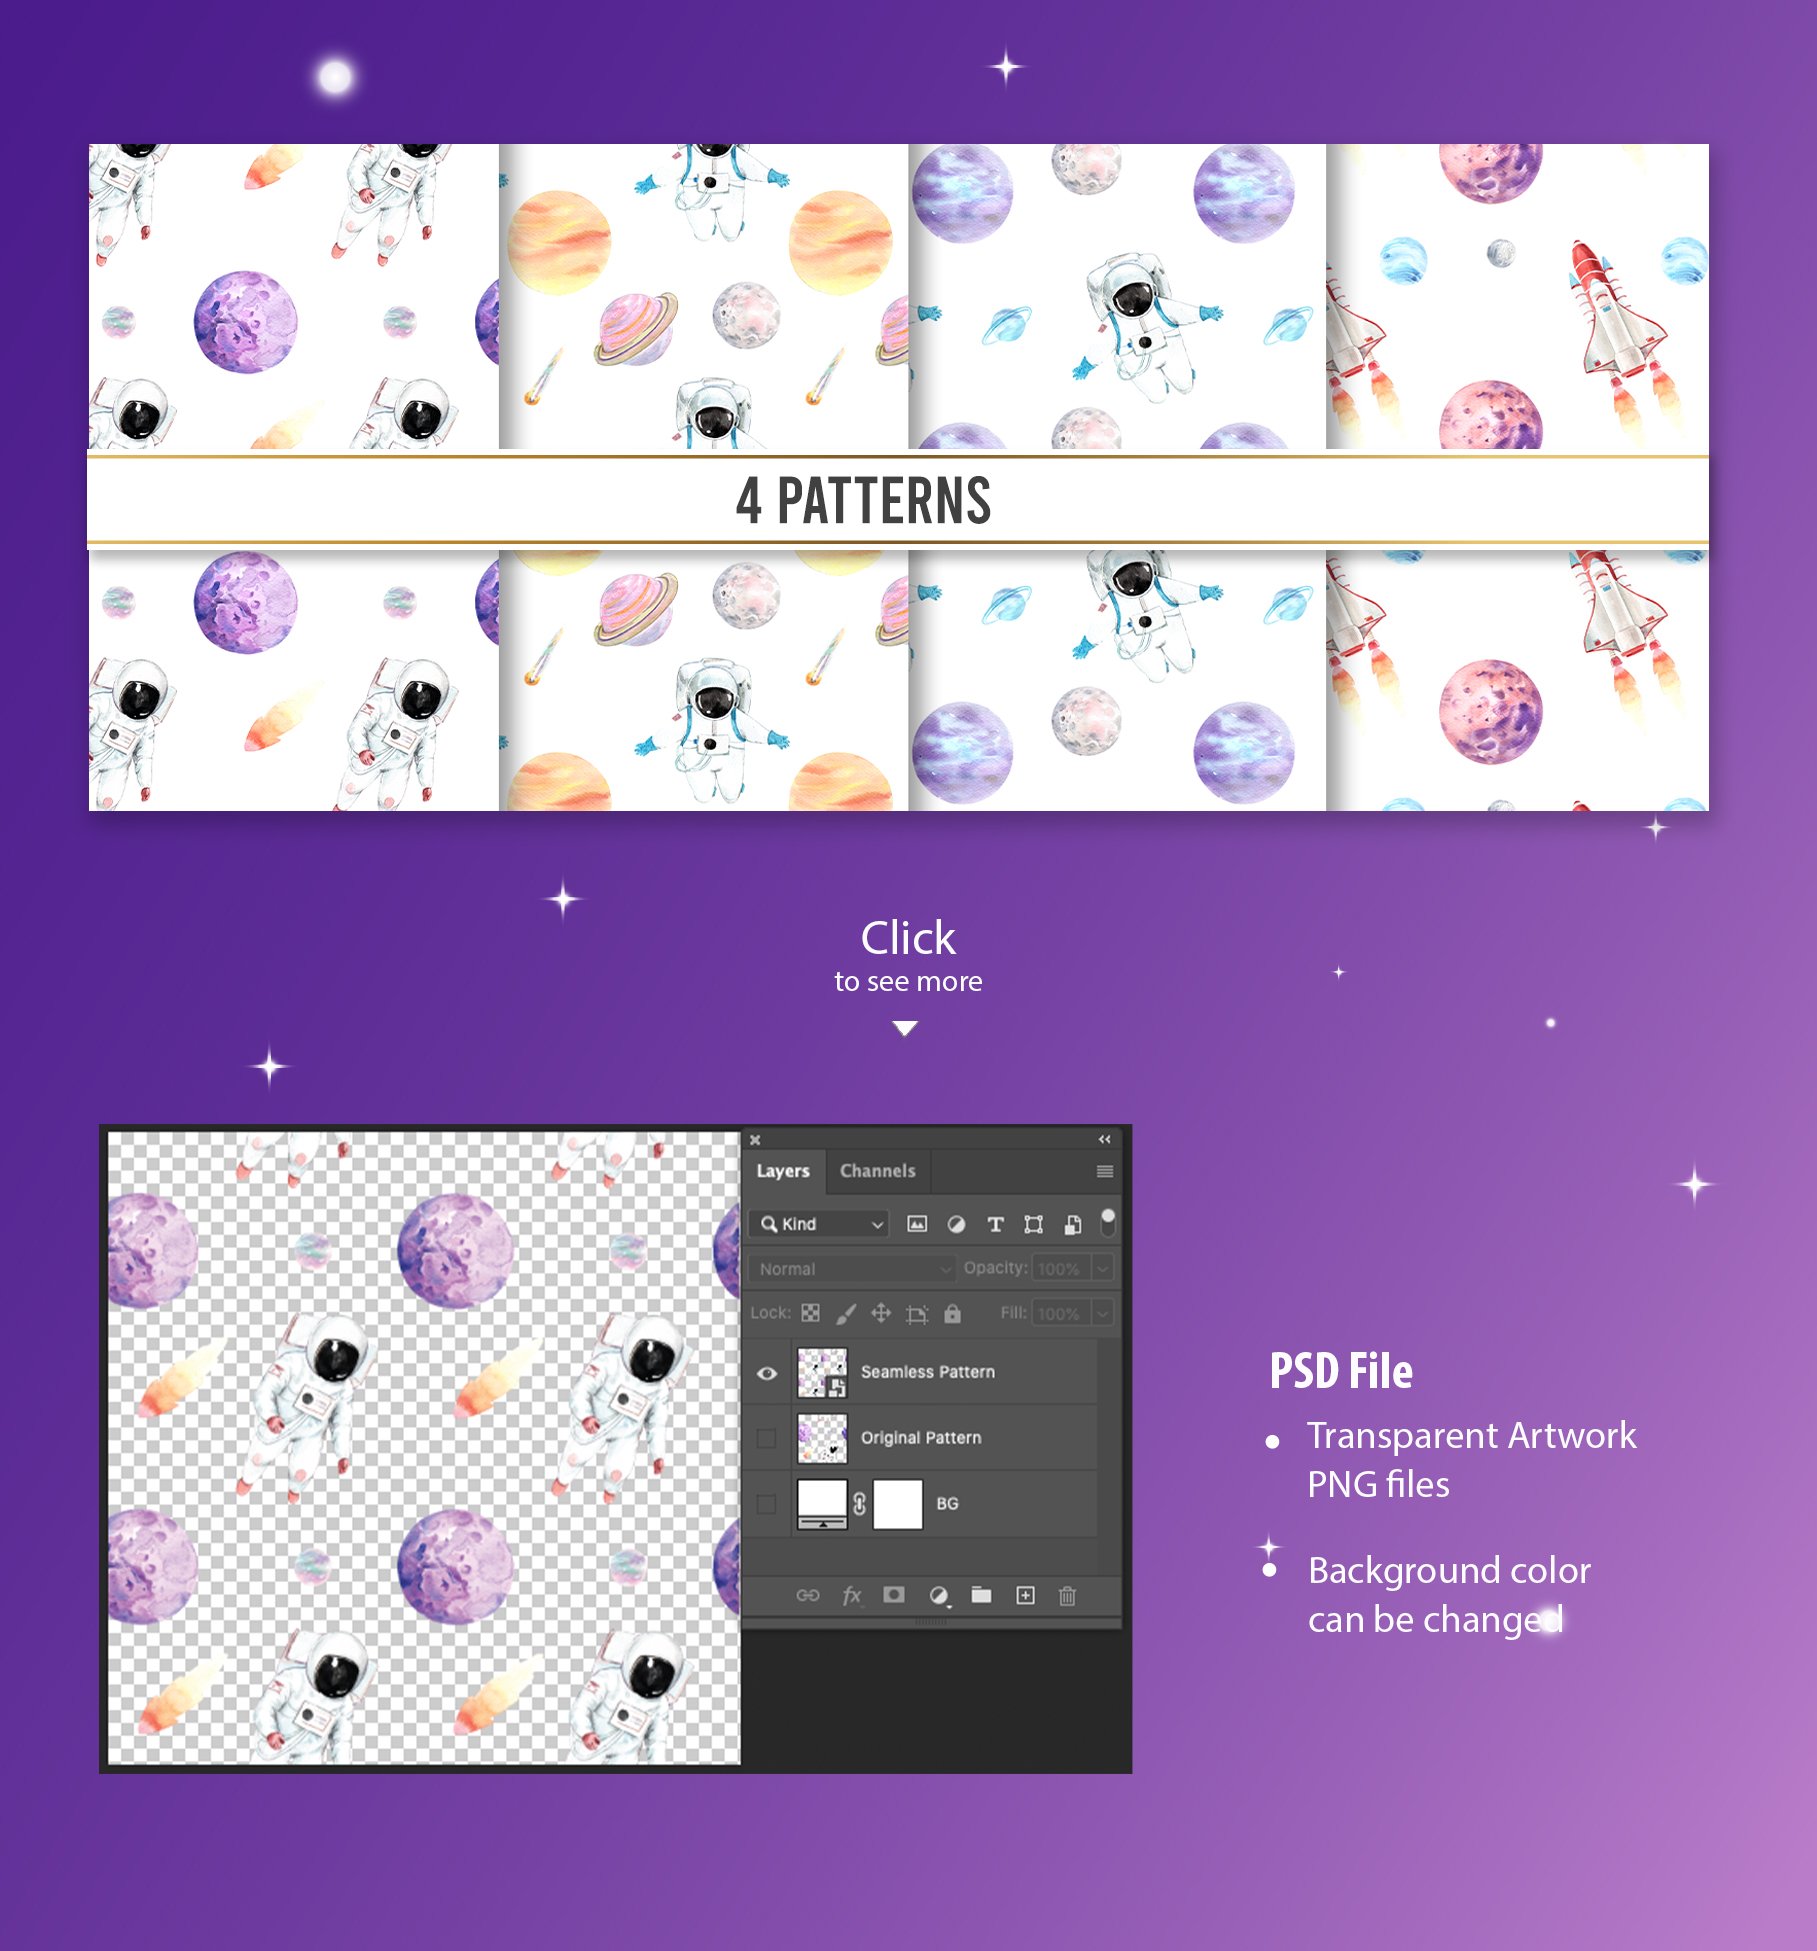 Galaxy patterns for your project.